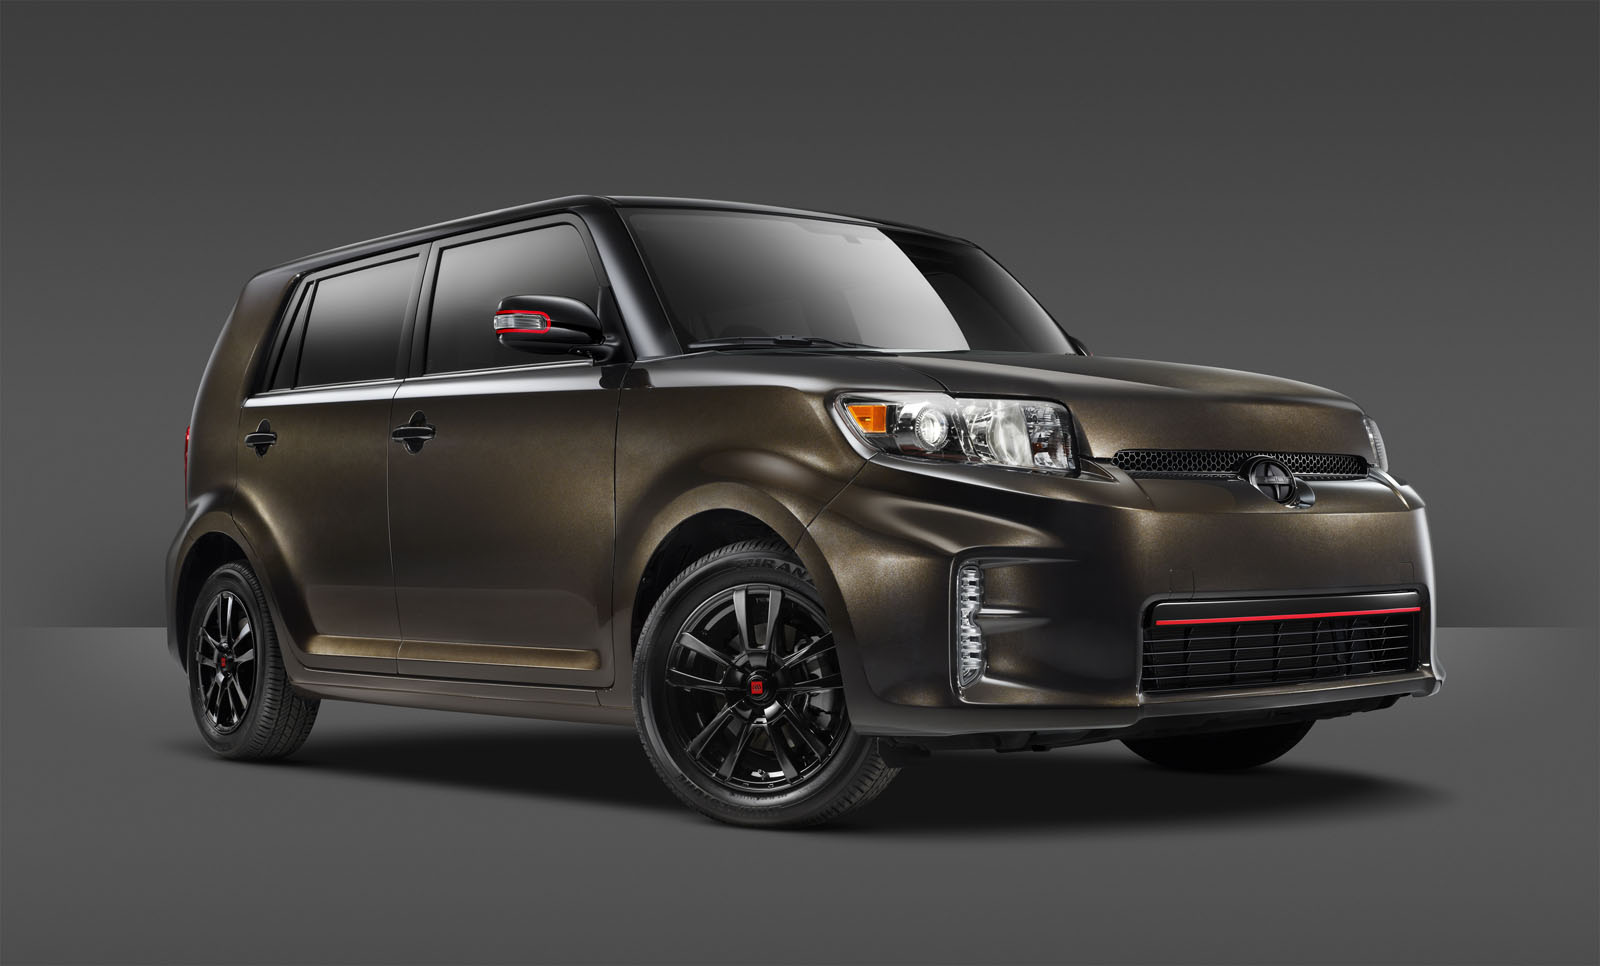 Say Good-Bye to the xB from Scion